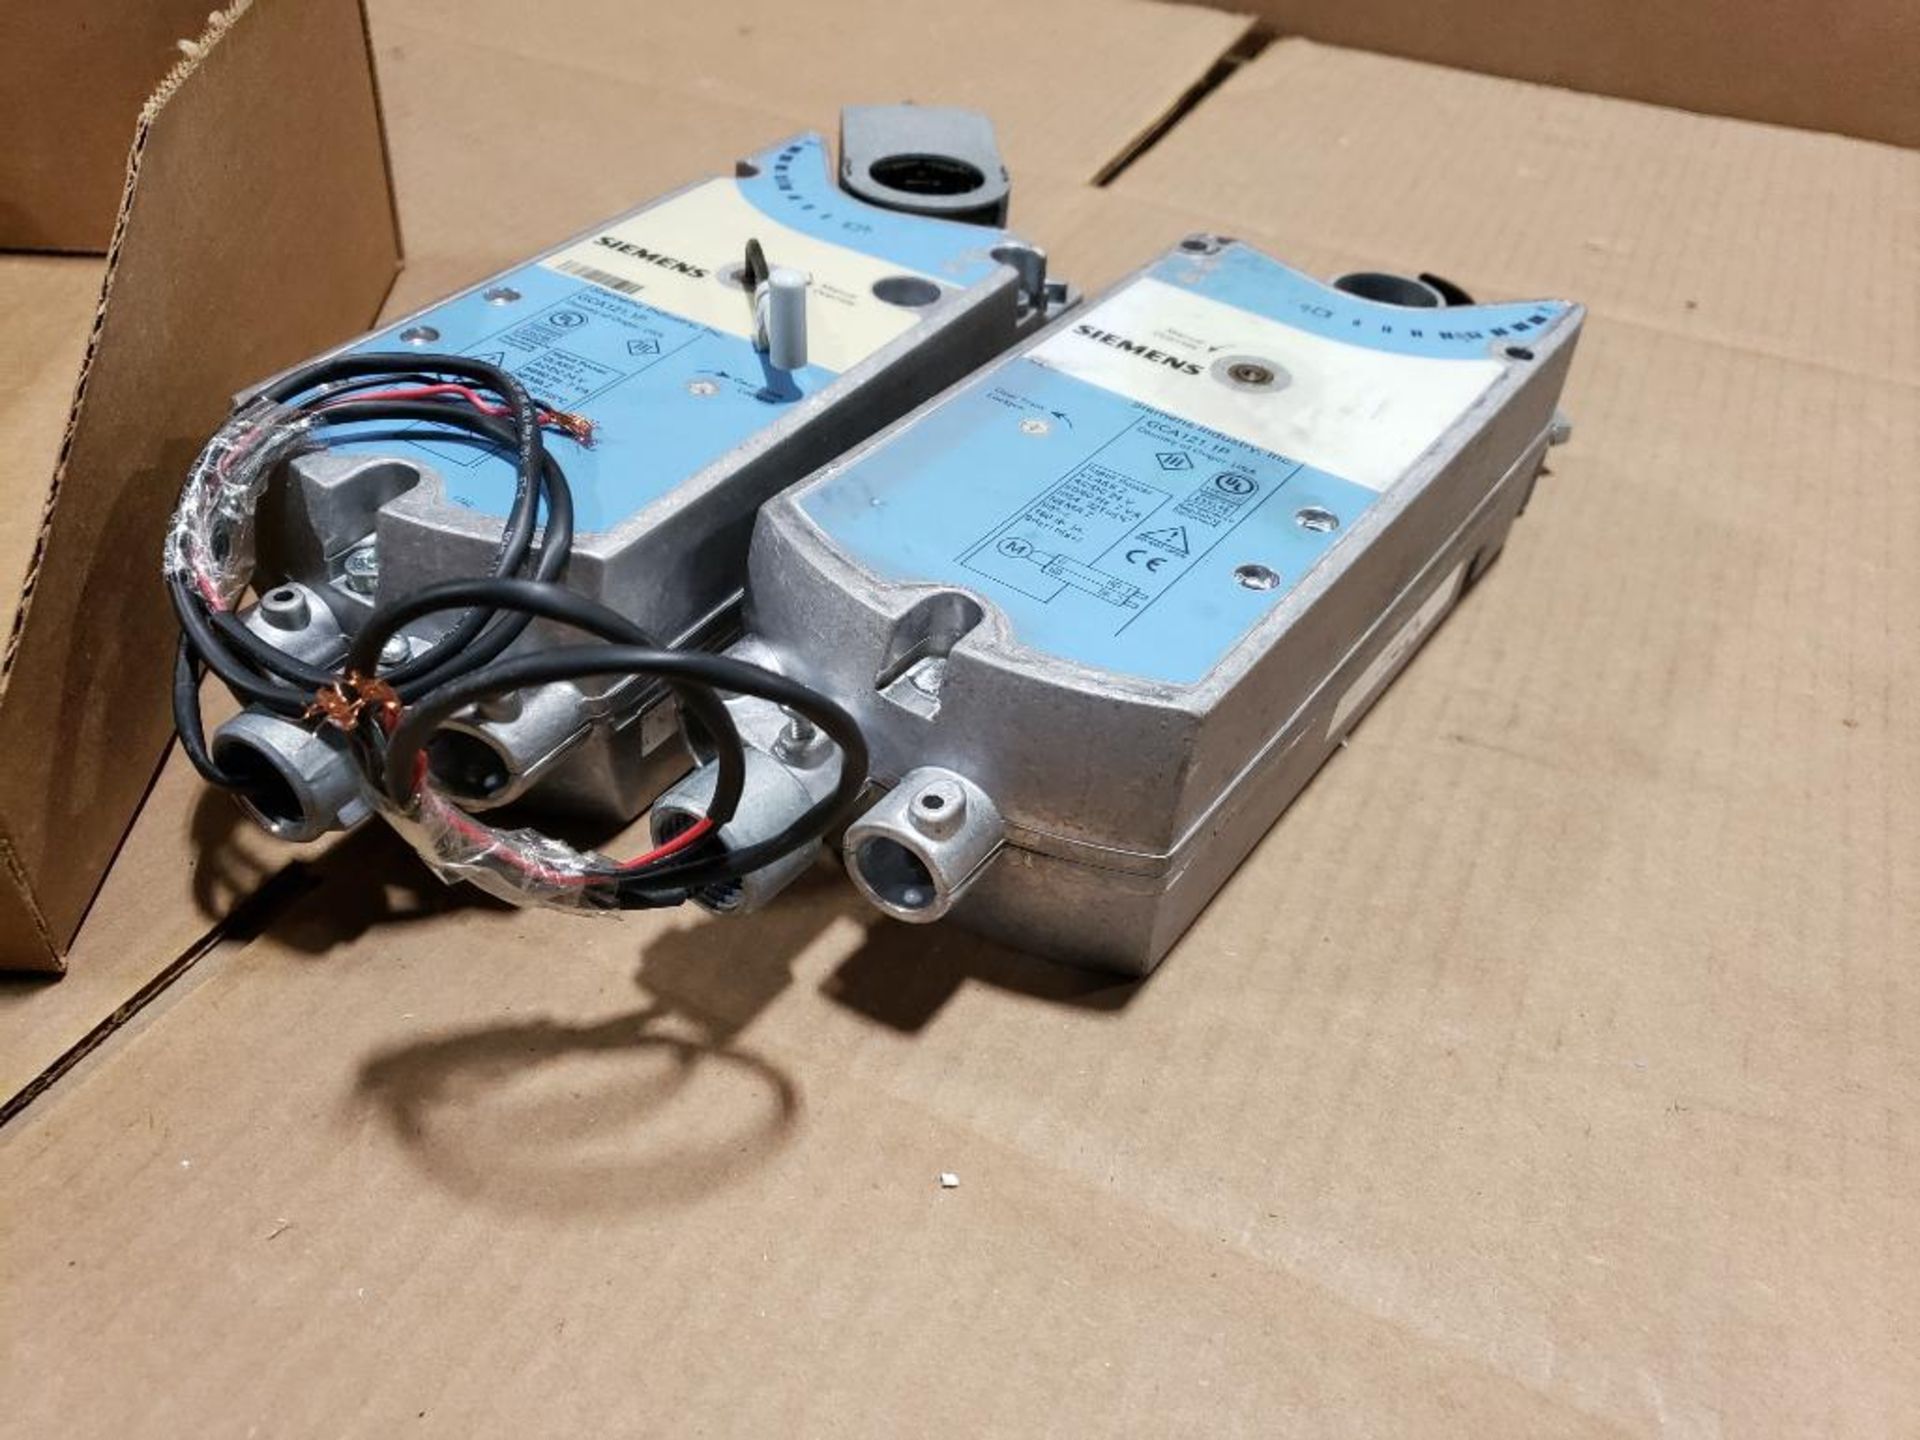 Qty 2 - Siemens actuator. Part number GCA121-1P. - Image 5 of 5